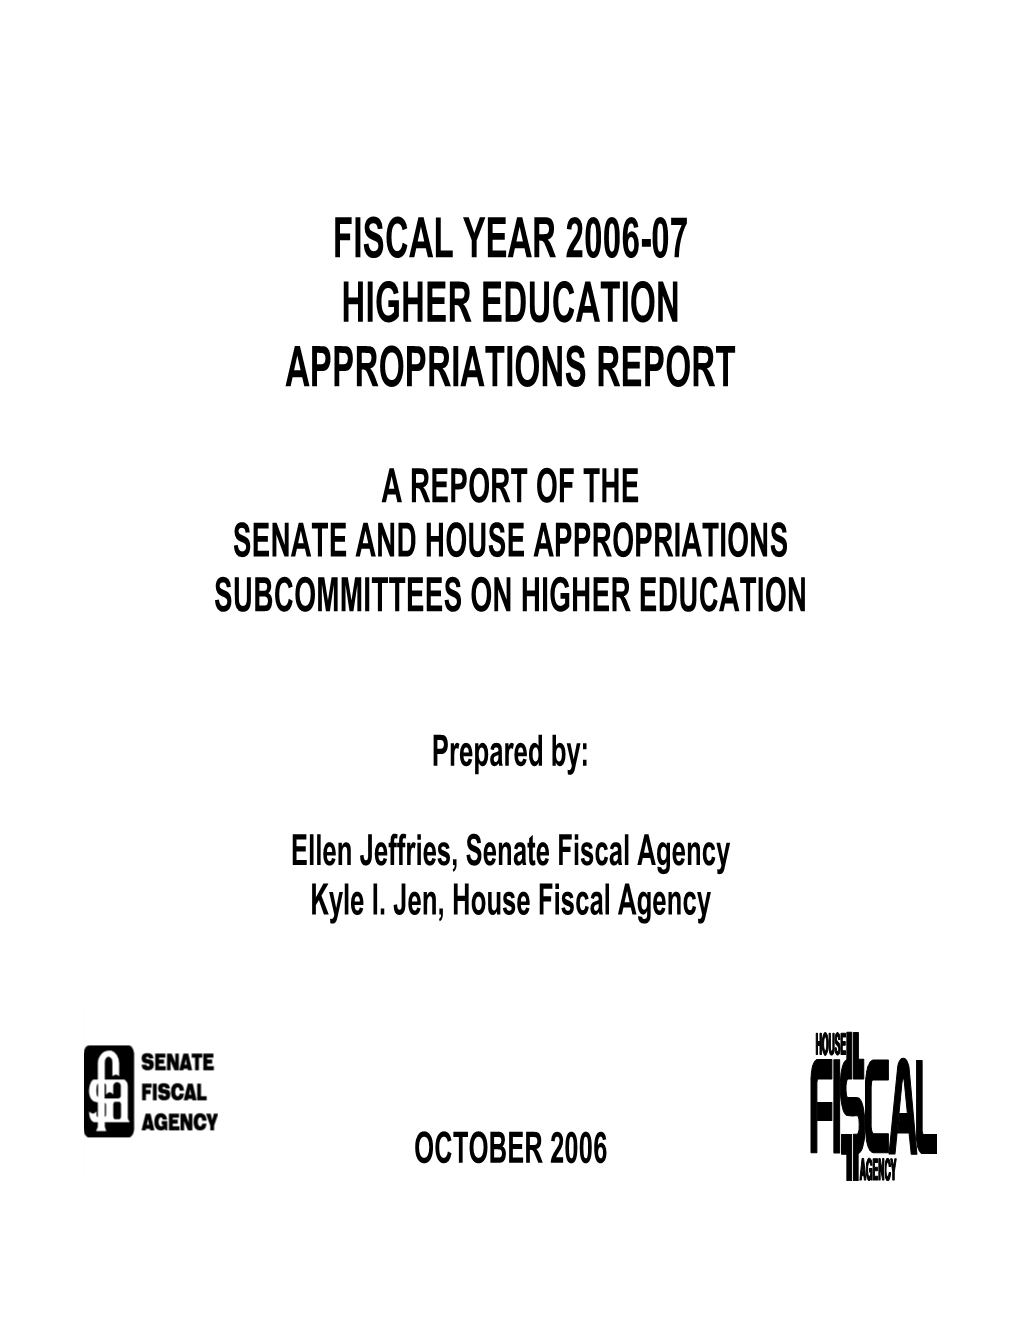 Higher Education Appropriations Report